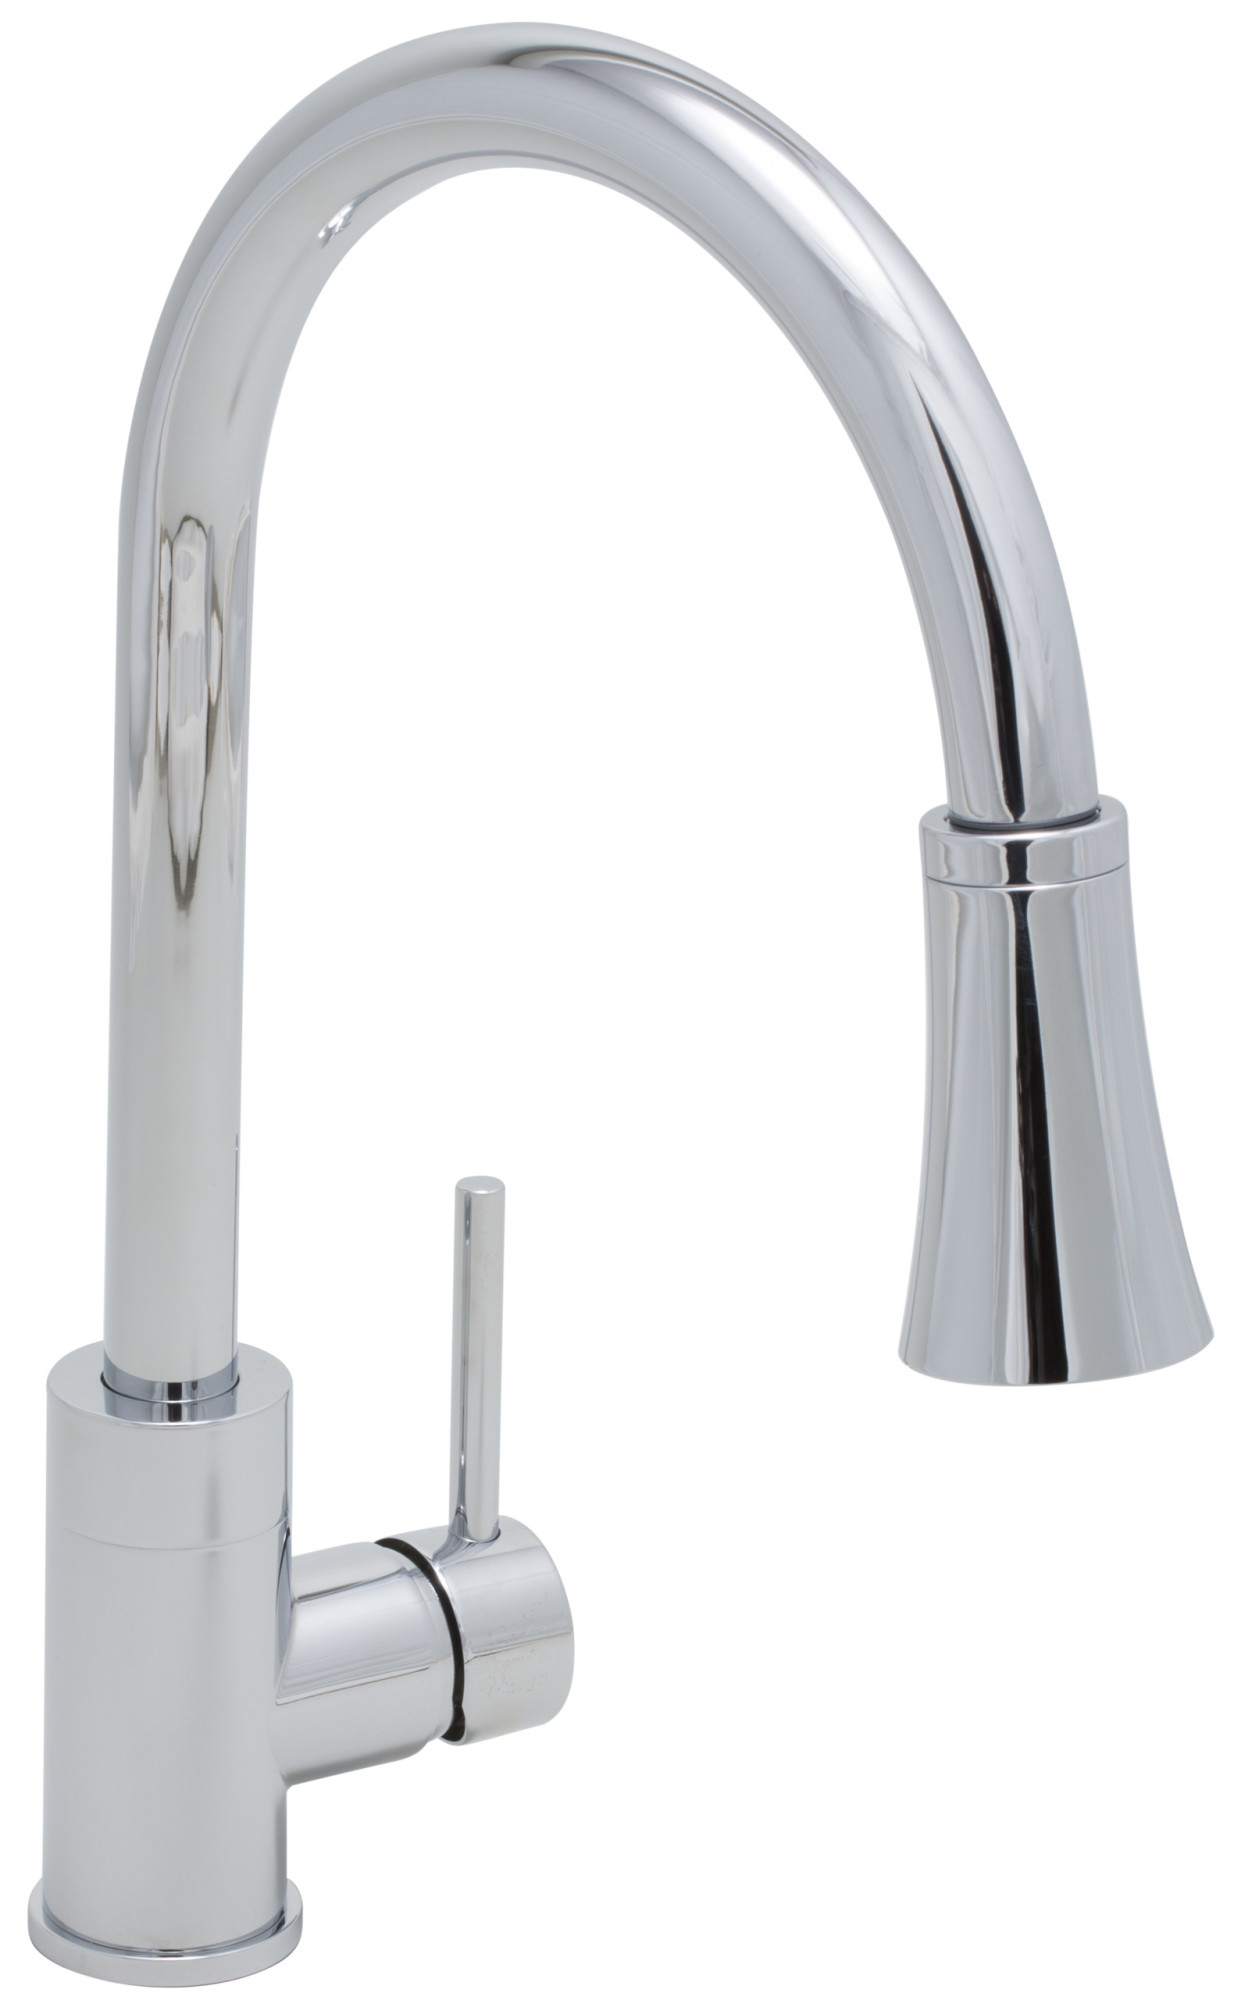 Proflo Pfxc7011 Chrome Pullout Spray Kitchen Faucet With Optional